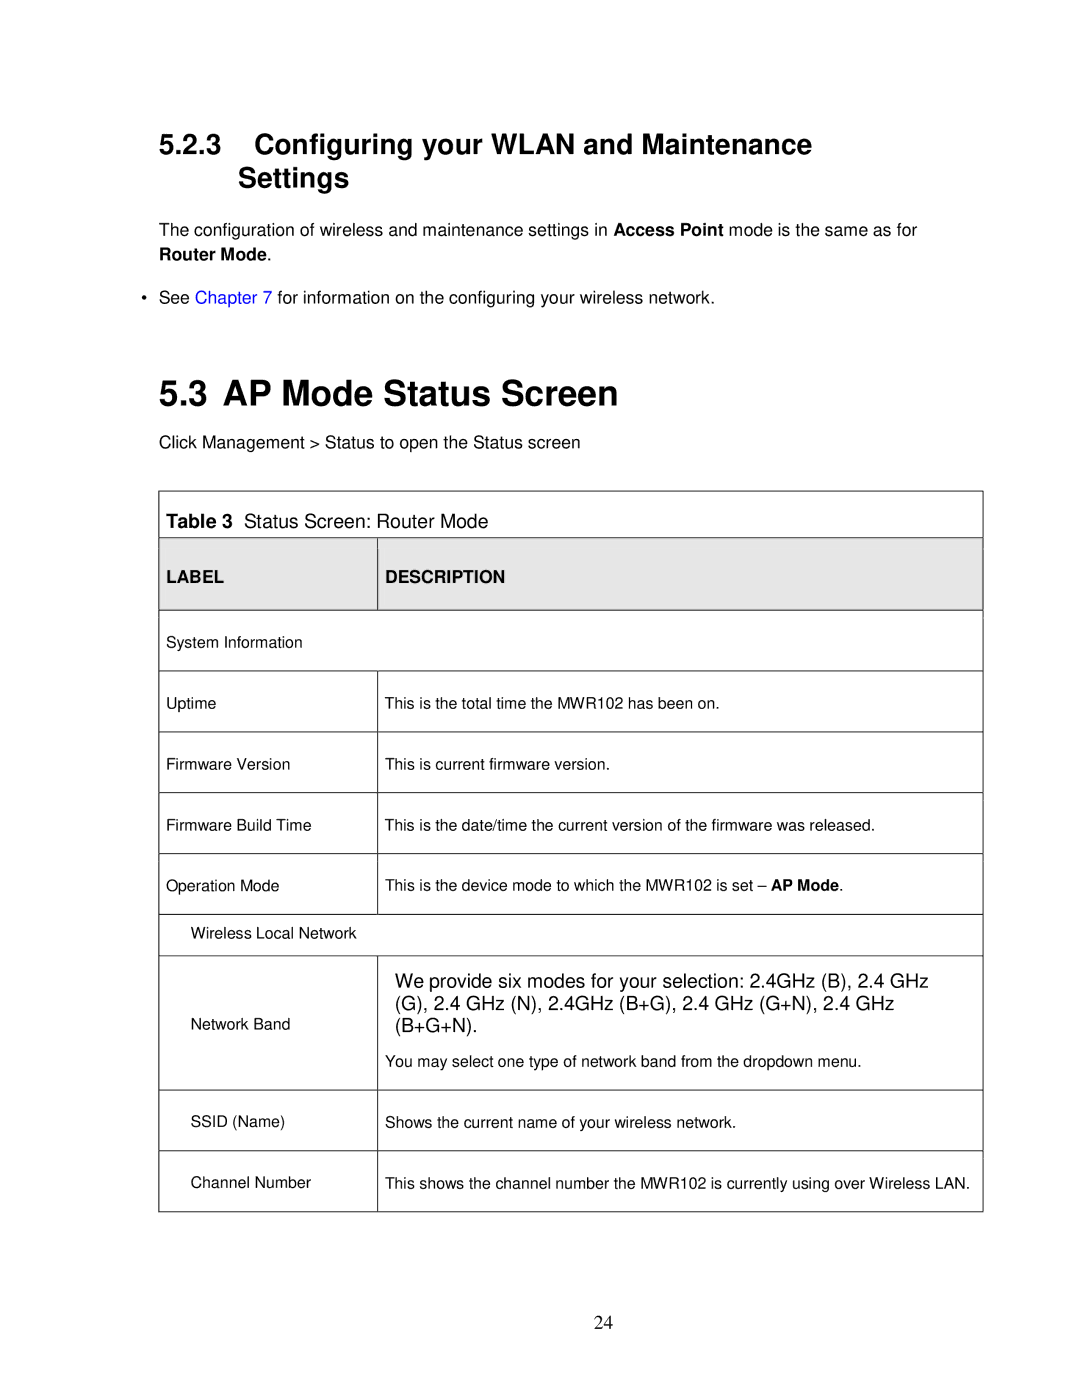 ZyXEL Communications MWR102 manual AP Mode Status Screen, Configuring your Wlan and Maintenance Settings 